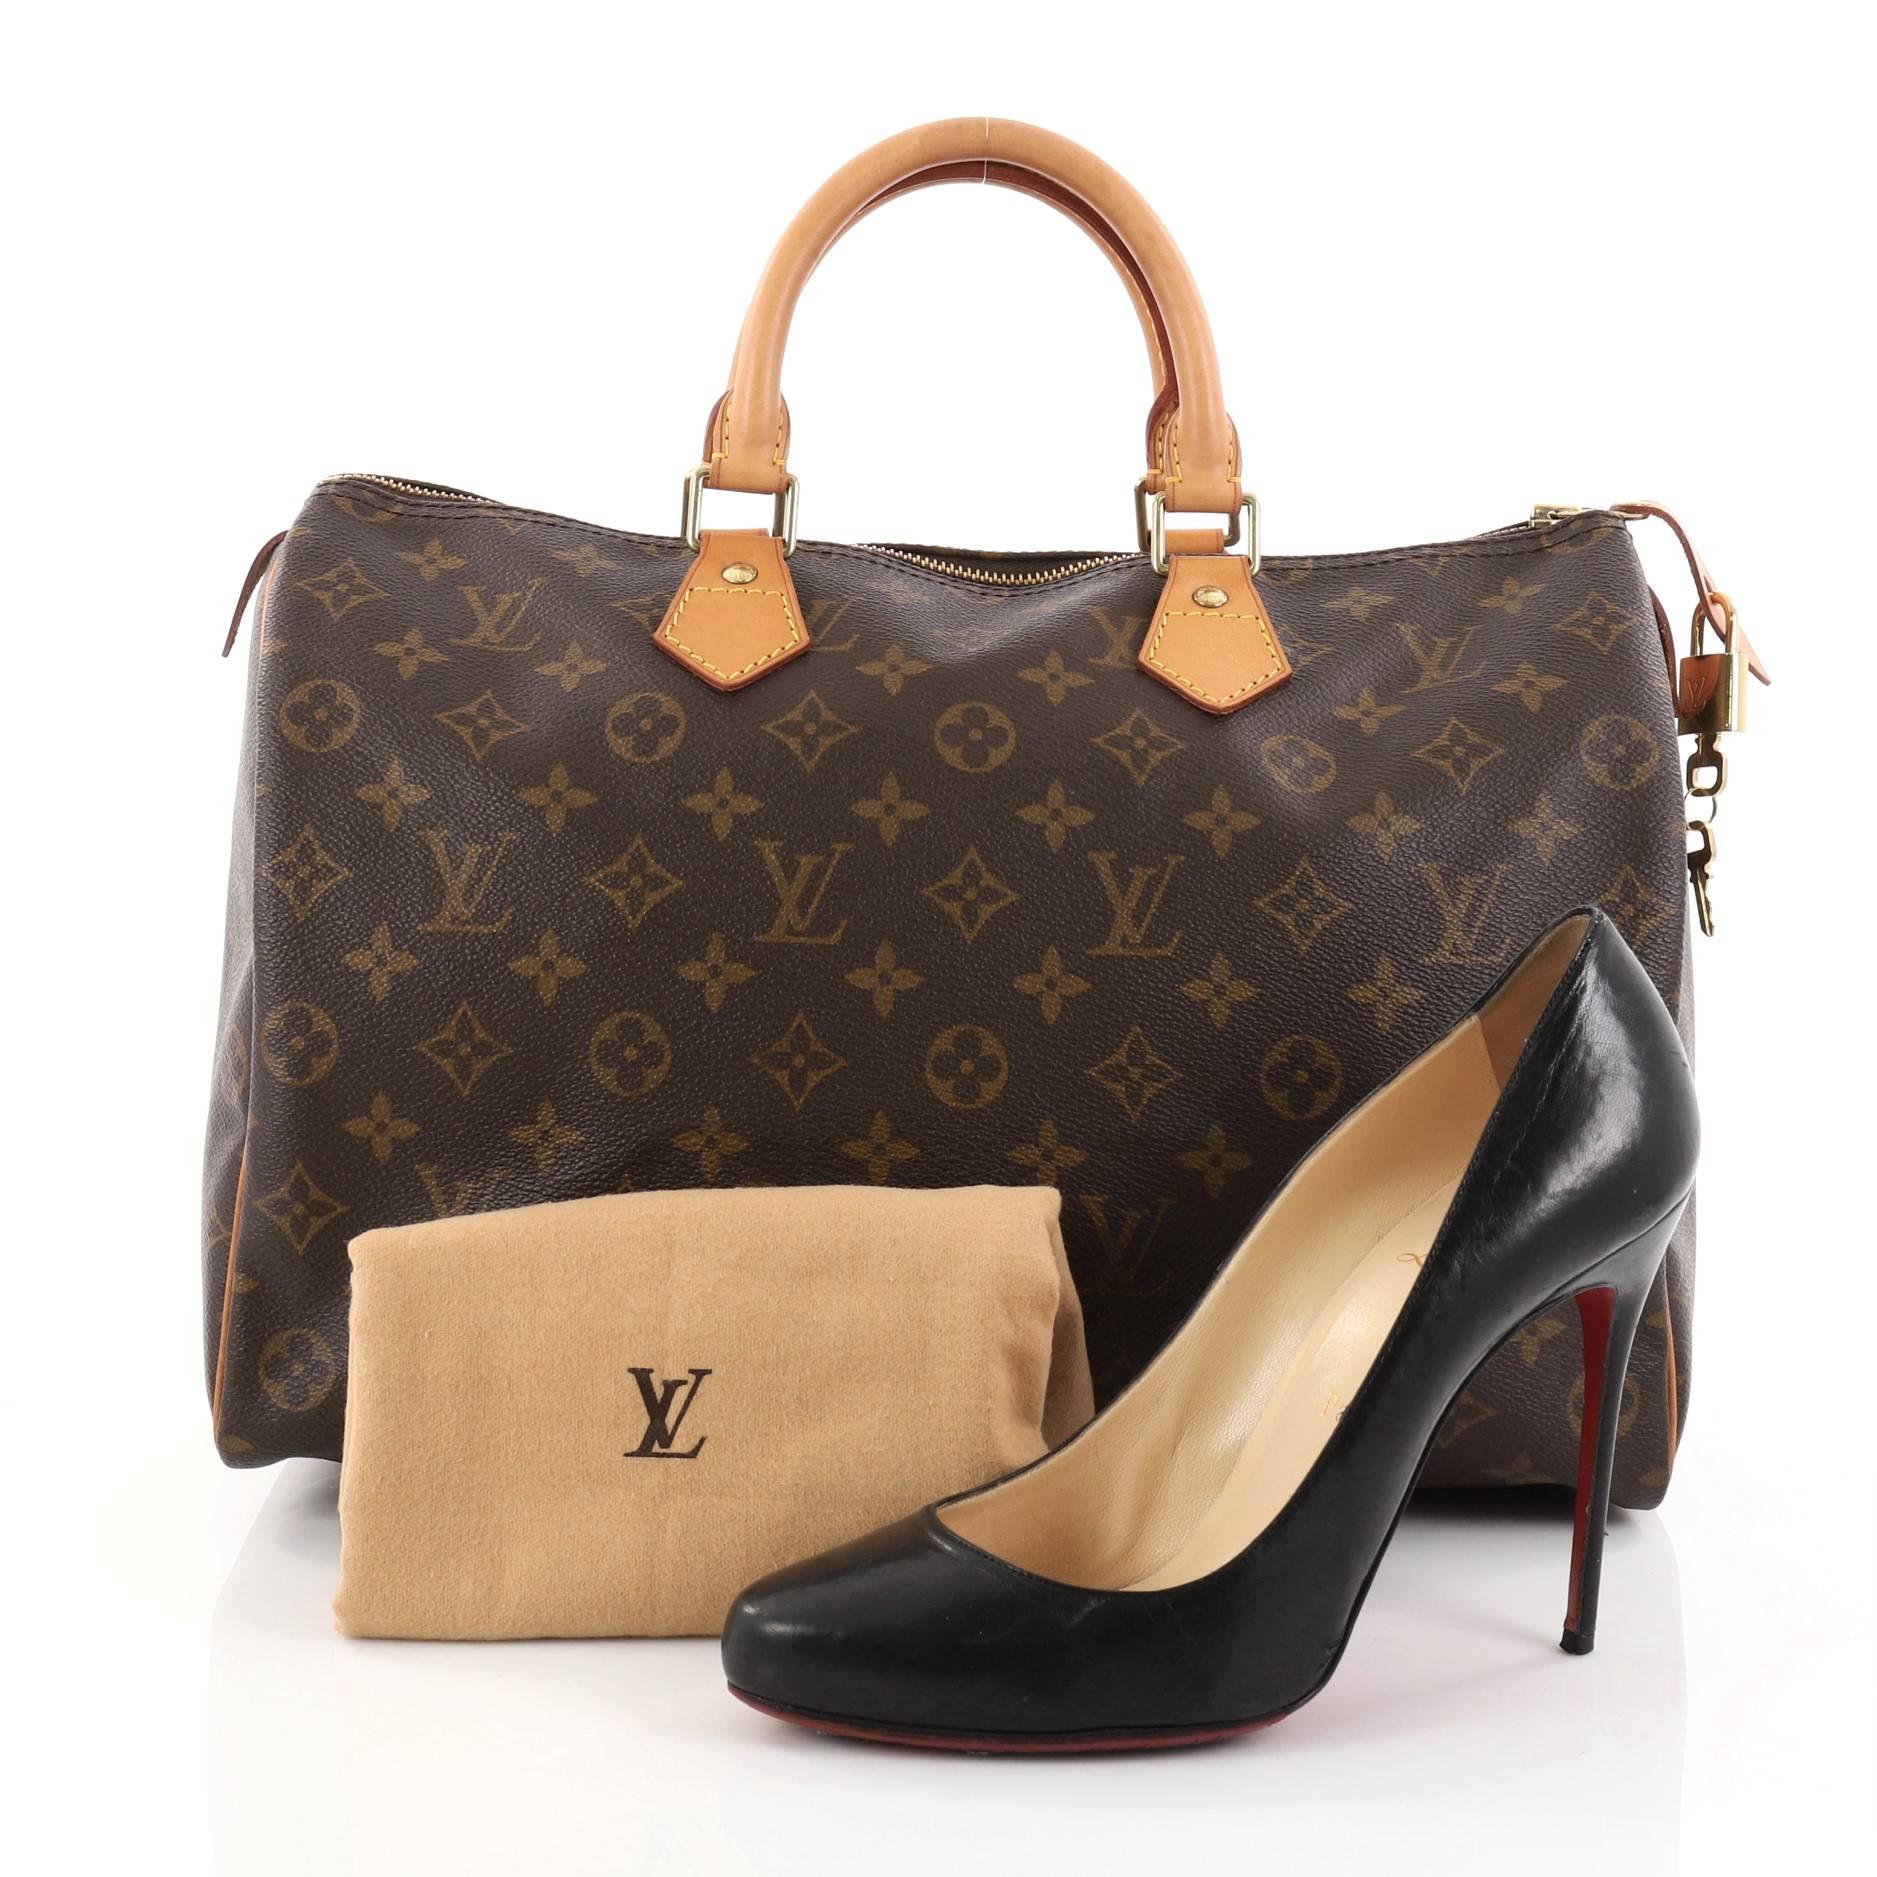 This authentic Louis Vuitton Speedy Handbag Monogram Canvas 35 is a classic must-have, making it ideal for everyday use. Constructed from Louis Vuitton's classic brown monogram coated canvas, this iconic Speedy features dual-rolled vachetta leather